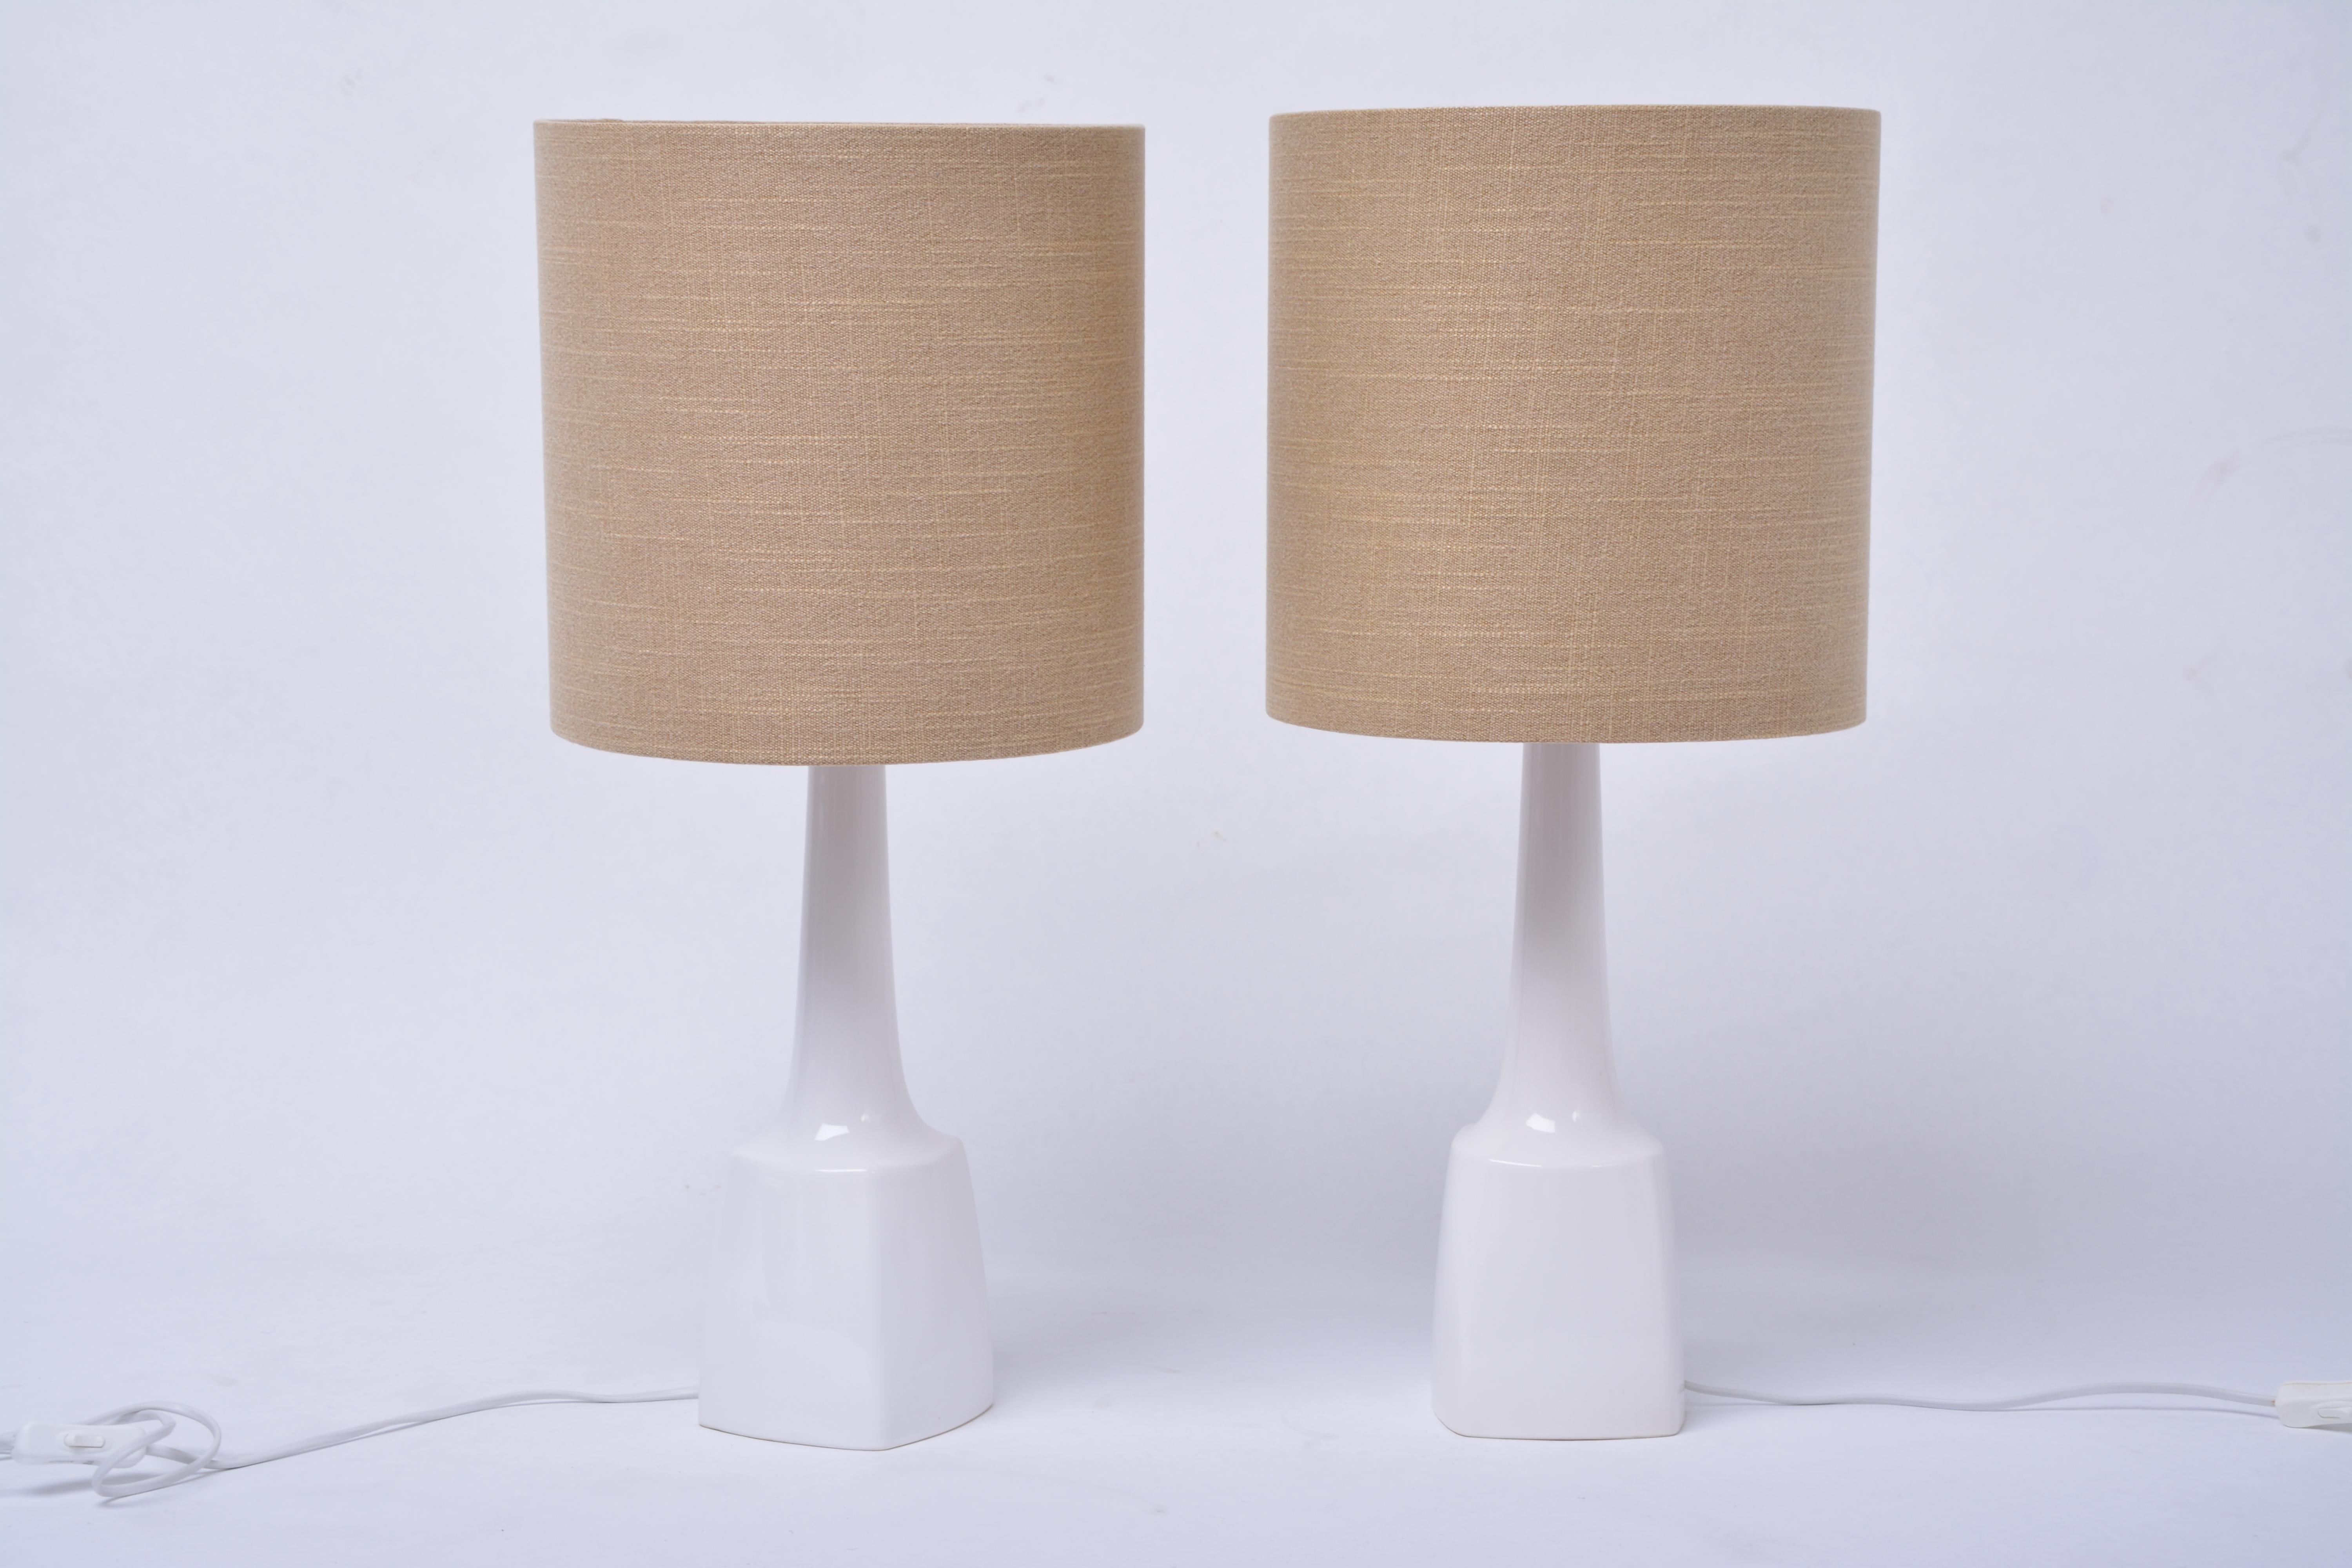 Pair of White Mid-Century Modern Ceramic Table Lamps Model 941 by Soholm 1